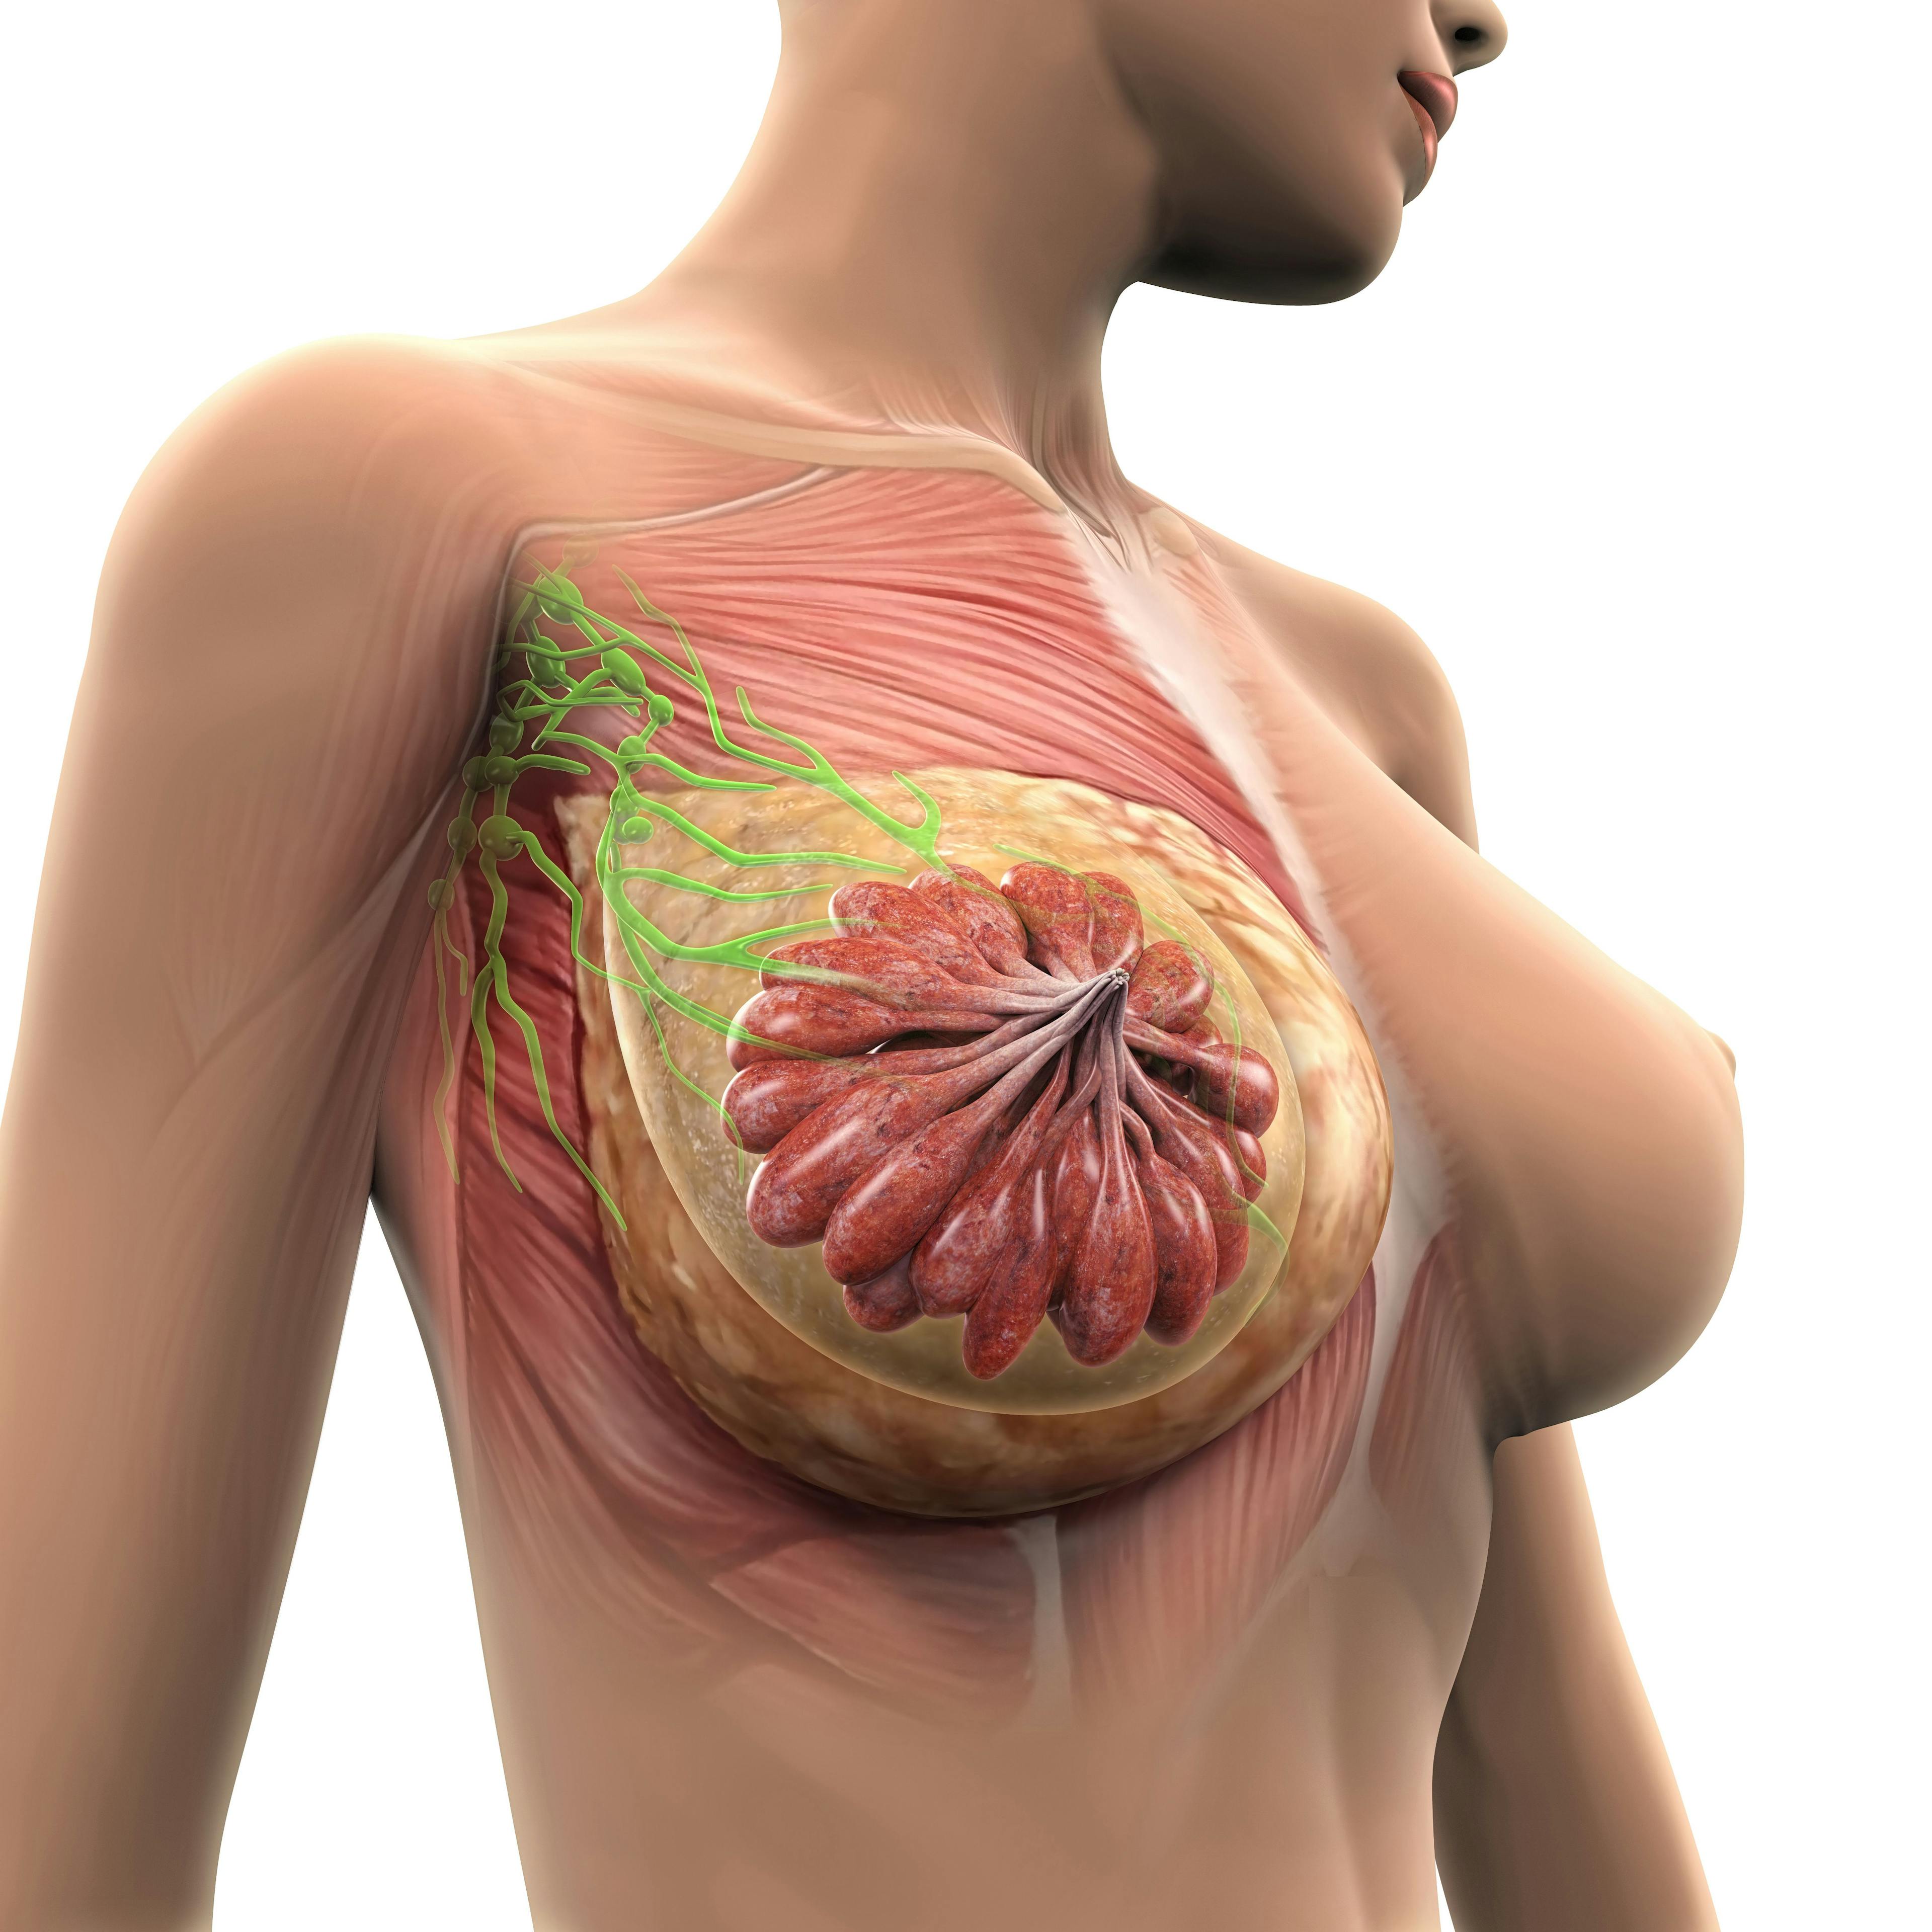 Safety data further support datopotamab deruxtecan as a new treatment option in metastatic hormone receptor–positive, HER2-negative breast cancer.